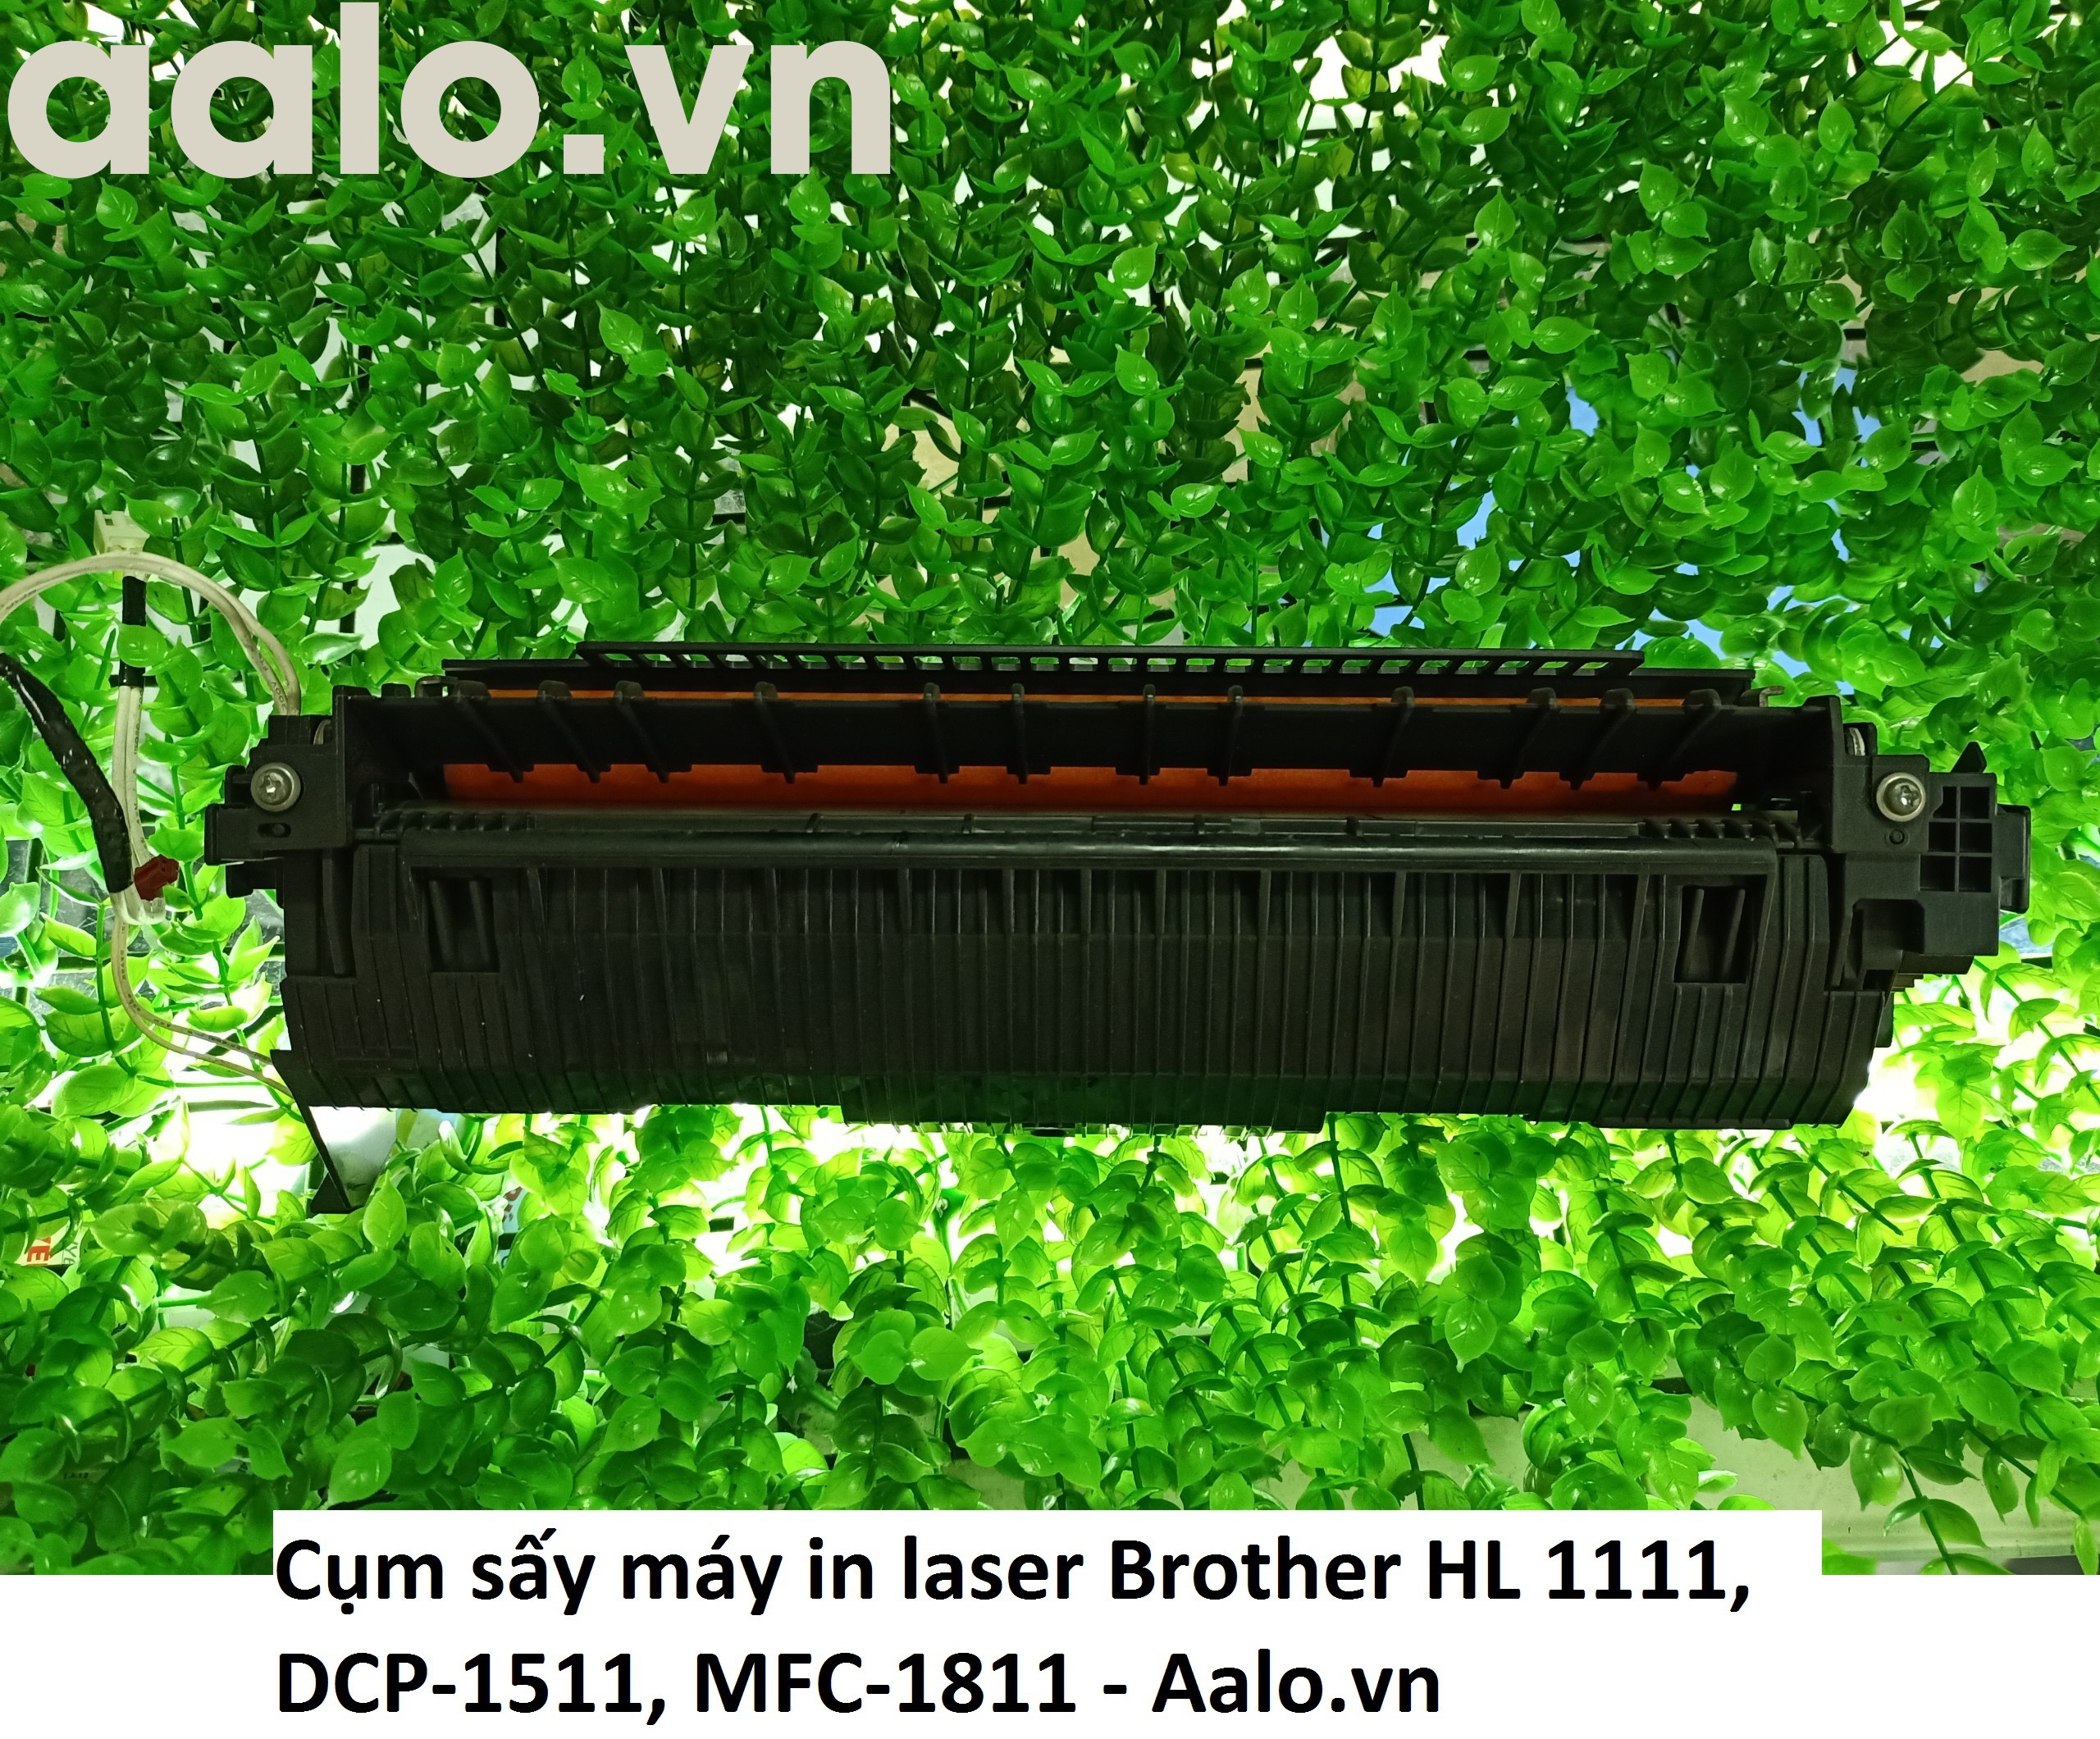 Cụm sấy máy in laser Brother HL 1111, DCP-1511, MFC-1811